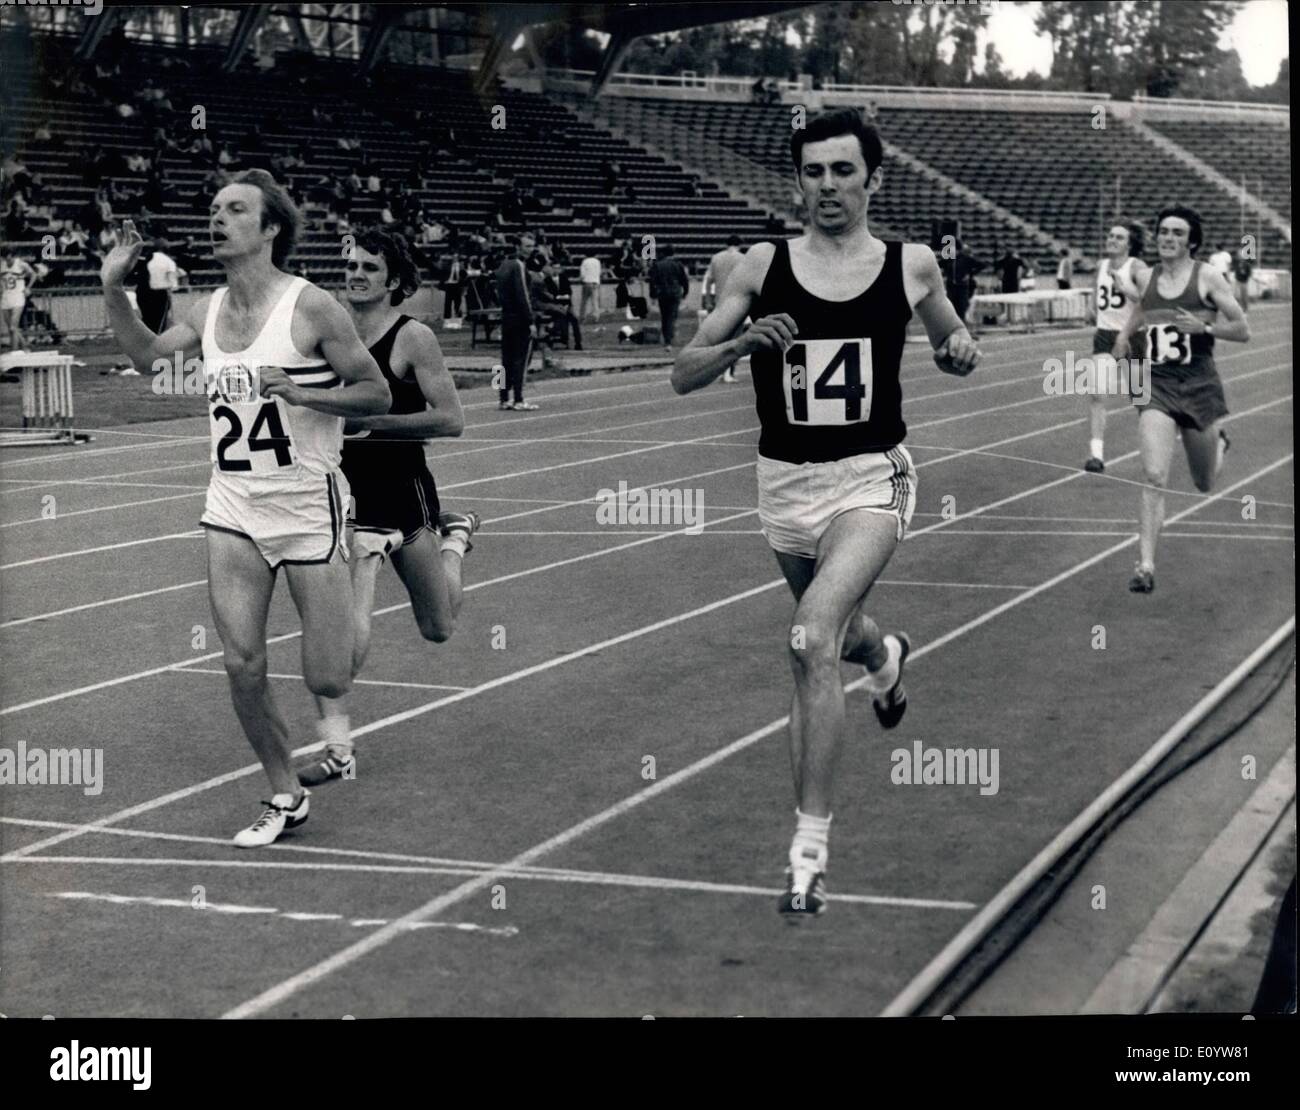 Jul. 07, 1971 - Win For Cropper: London: David Cropper of Birchafield Harriers (No 14) breaks the tape fraction before John Greatrex of South London Harriers (No 14) to win Heat 2 of the 800 Metres at the Crystal Palace National Sports Center in South London evening during the A.A.A. Championships. Both Crapper and Greatrix qualified for the final of the event. Cropper's time was 1 minute 53 second..a time equalled by Greatrix. Stock Photo